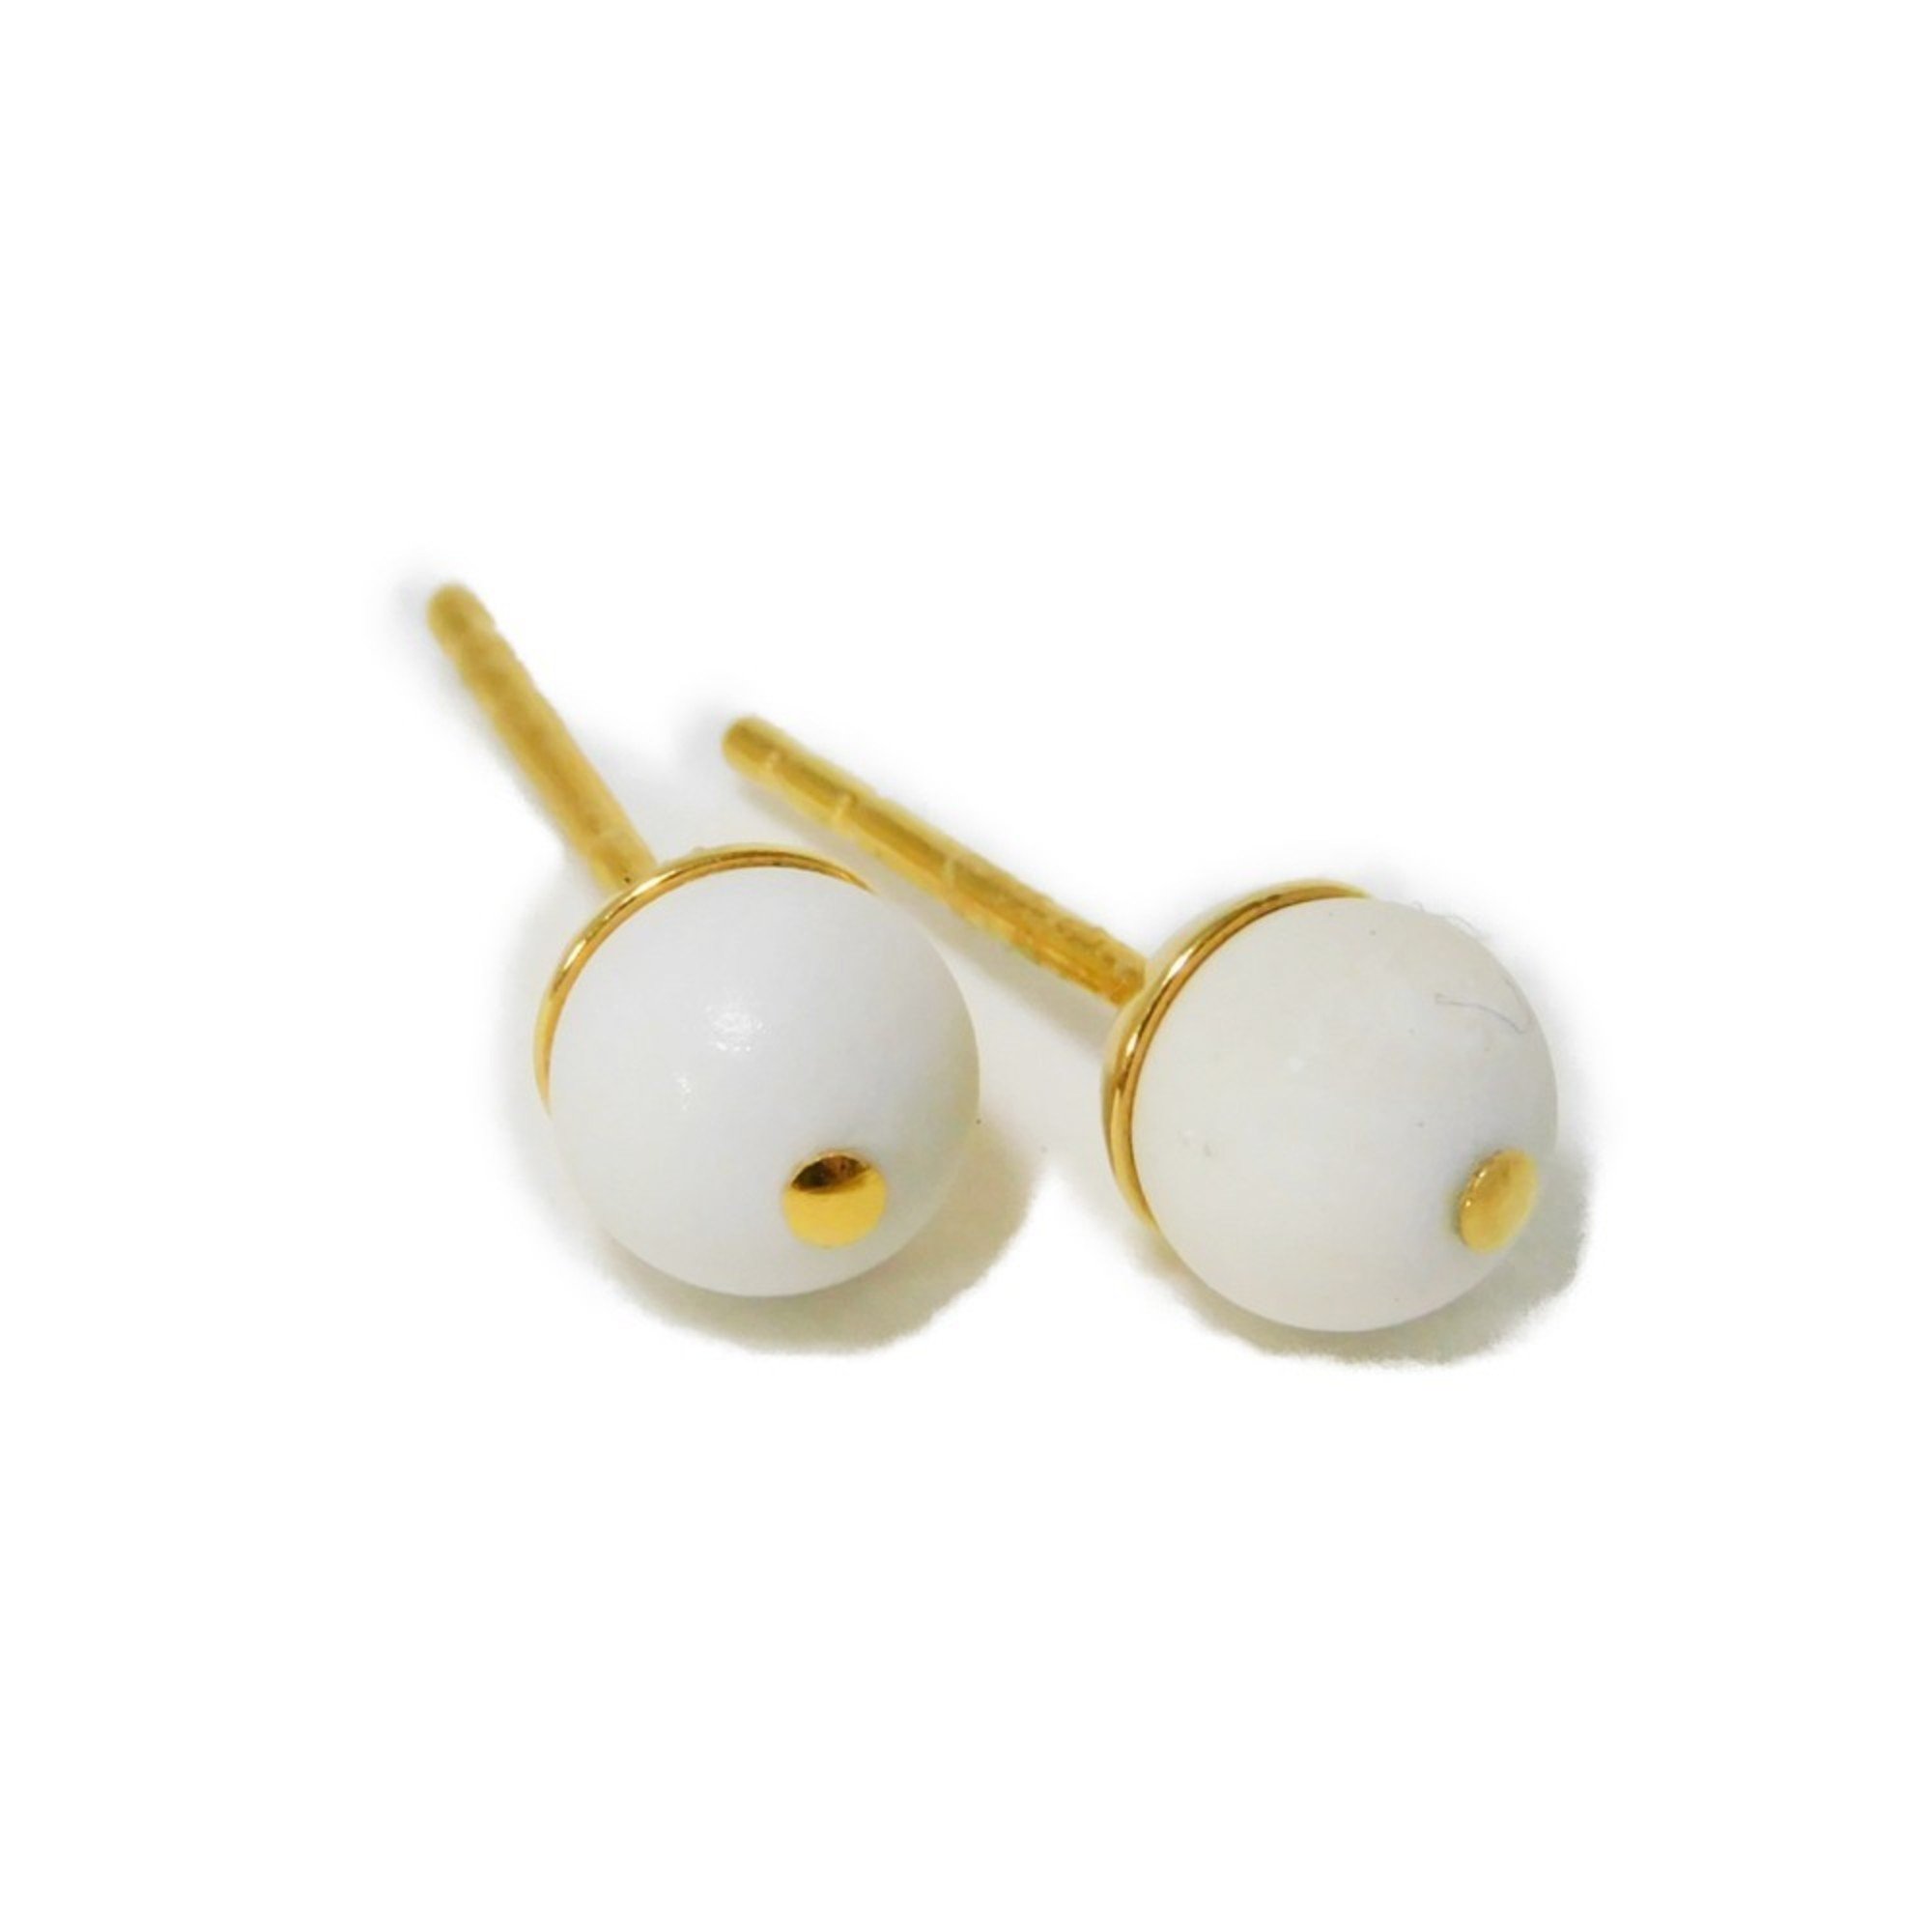 Christian Dior Dior Earrings Tribal D-VIBE Star Ball AirPods Holder Chain Removable Matte Lacquer Pearl White Women's